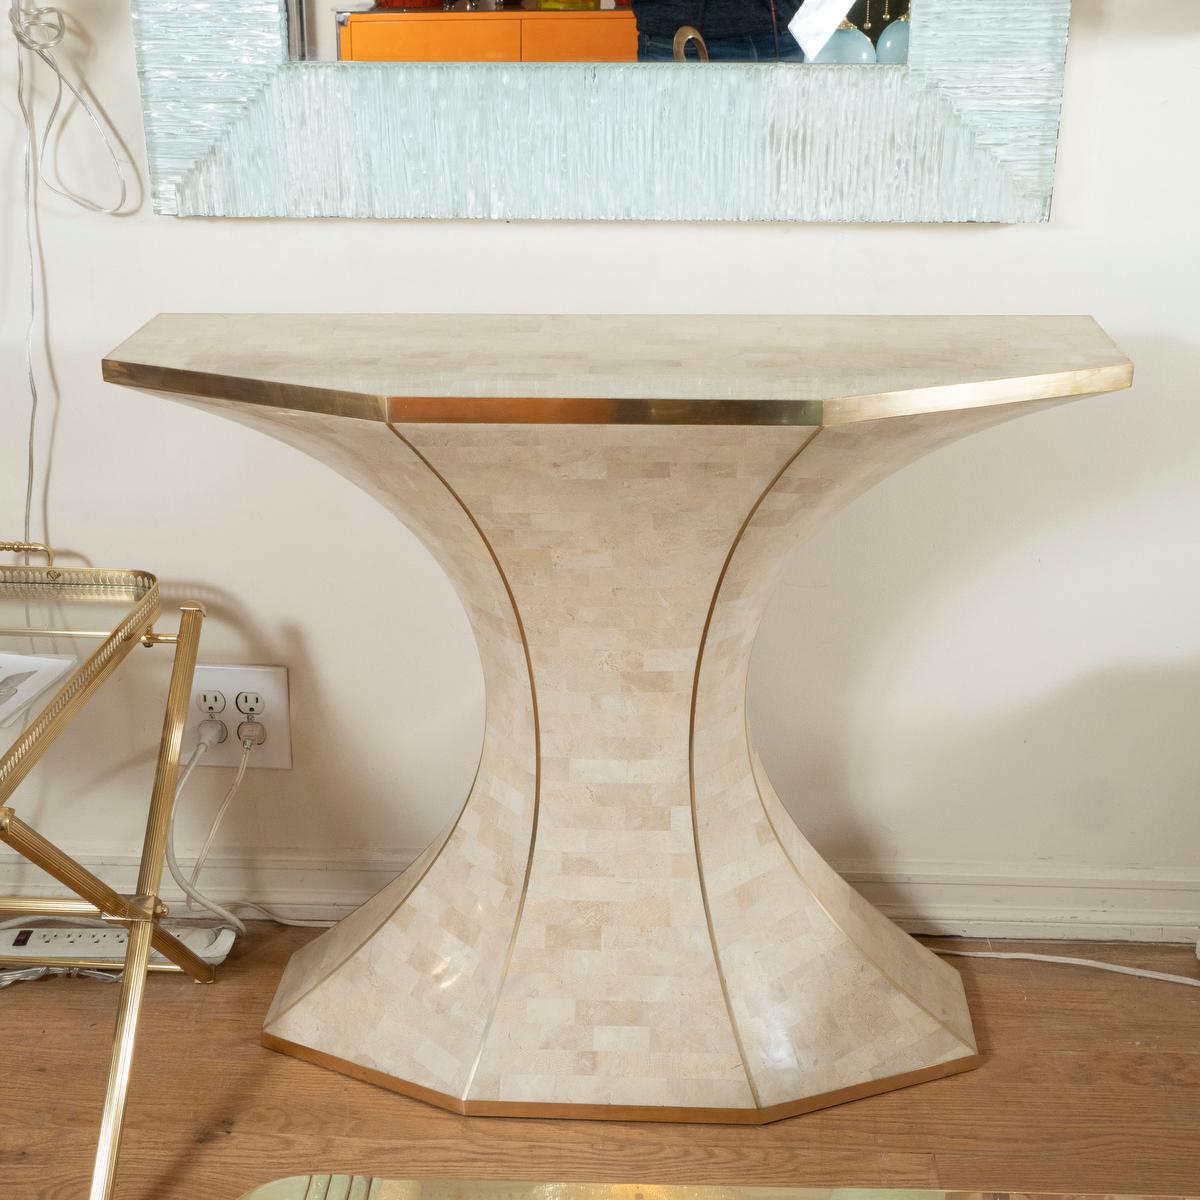 Tessellated stone demilune console with brass details.